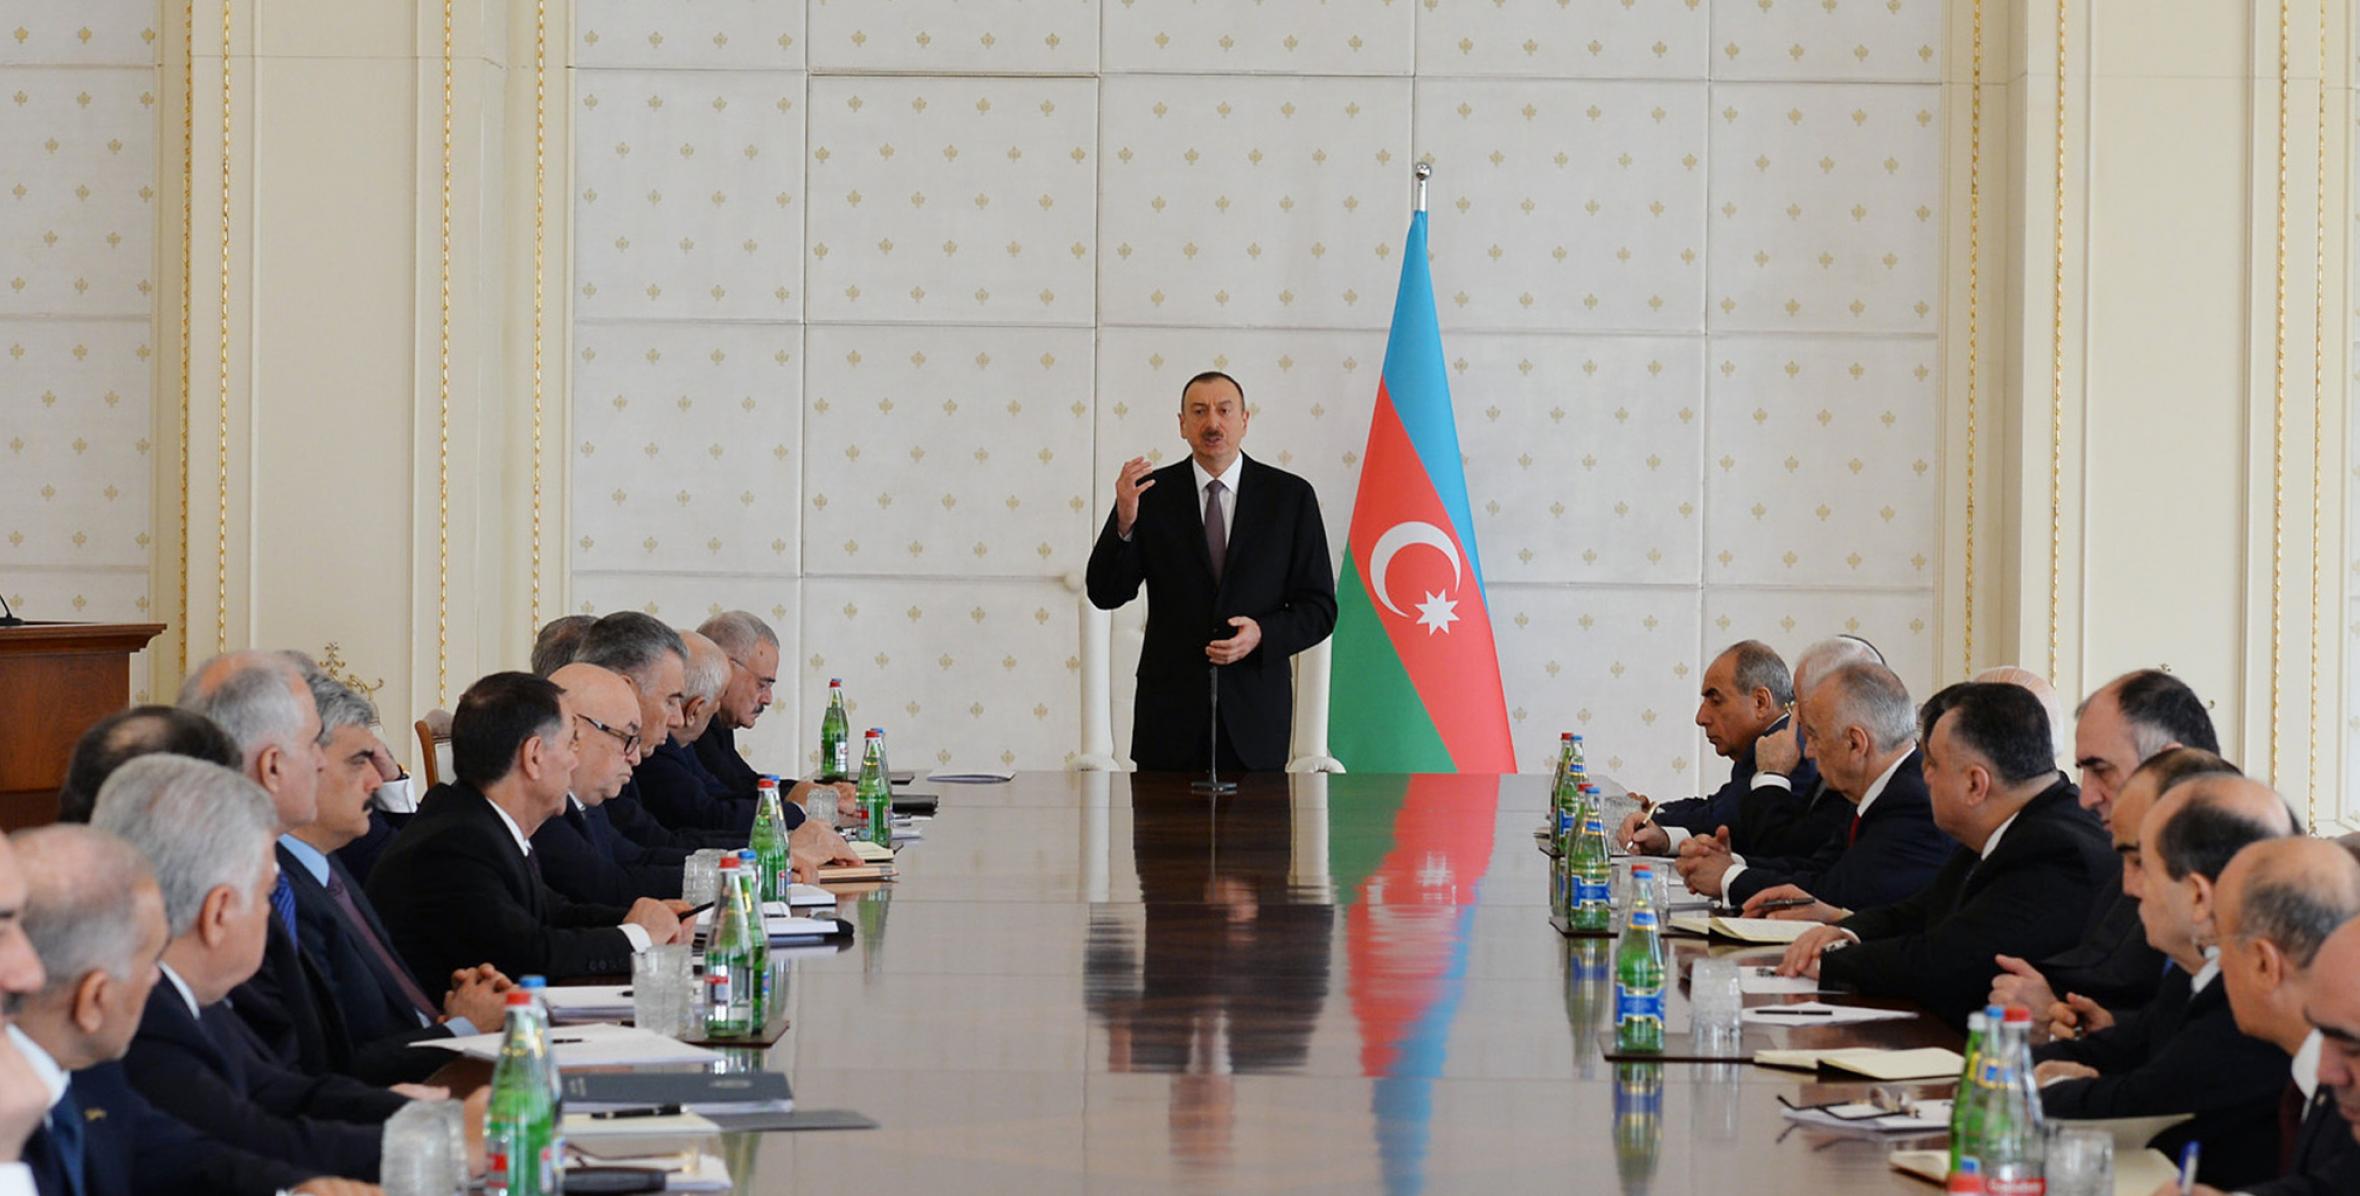 Opening speech by Ilham Aliyev at the meeting of the Cabinet of Ministers dedicated to the results of socioeconomic development in the first quarter of 2015 and objectives for the future